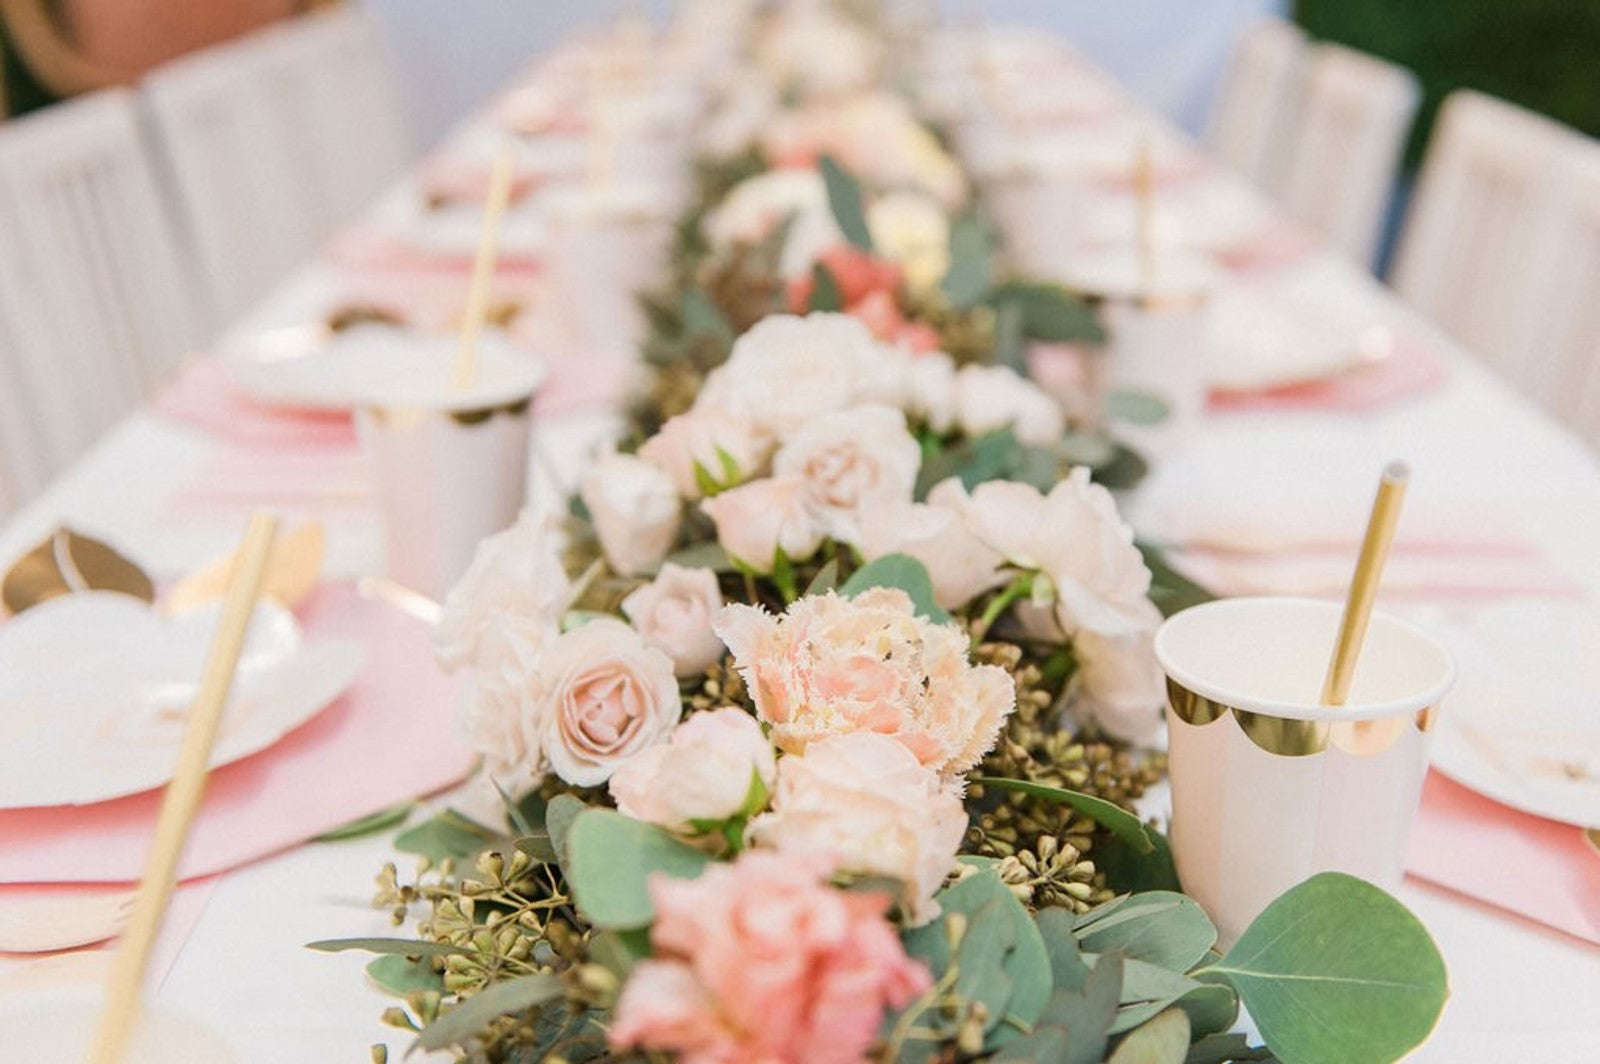 A beautiful table scape with pink flowers, place settings, and gold accents